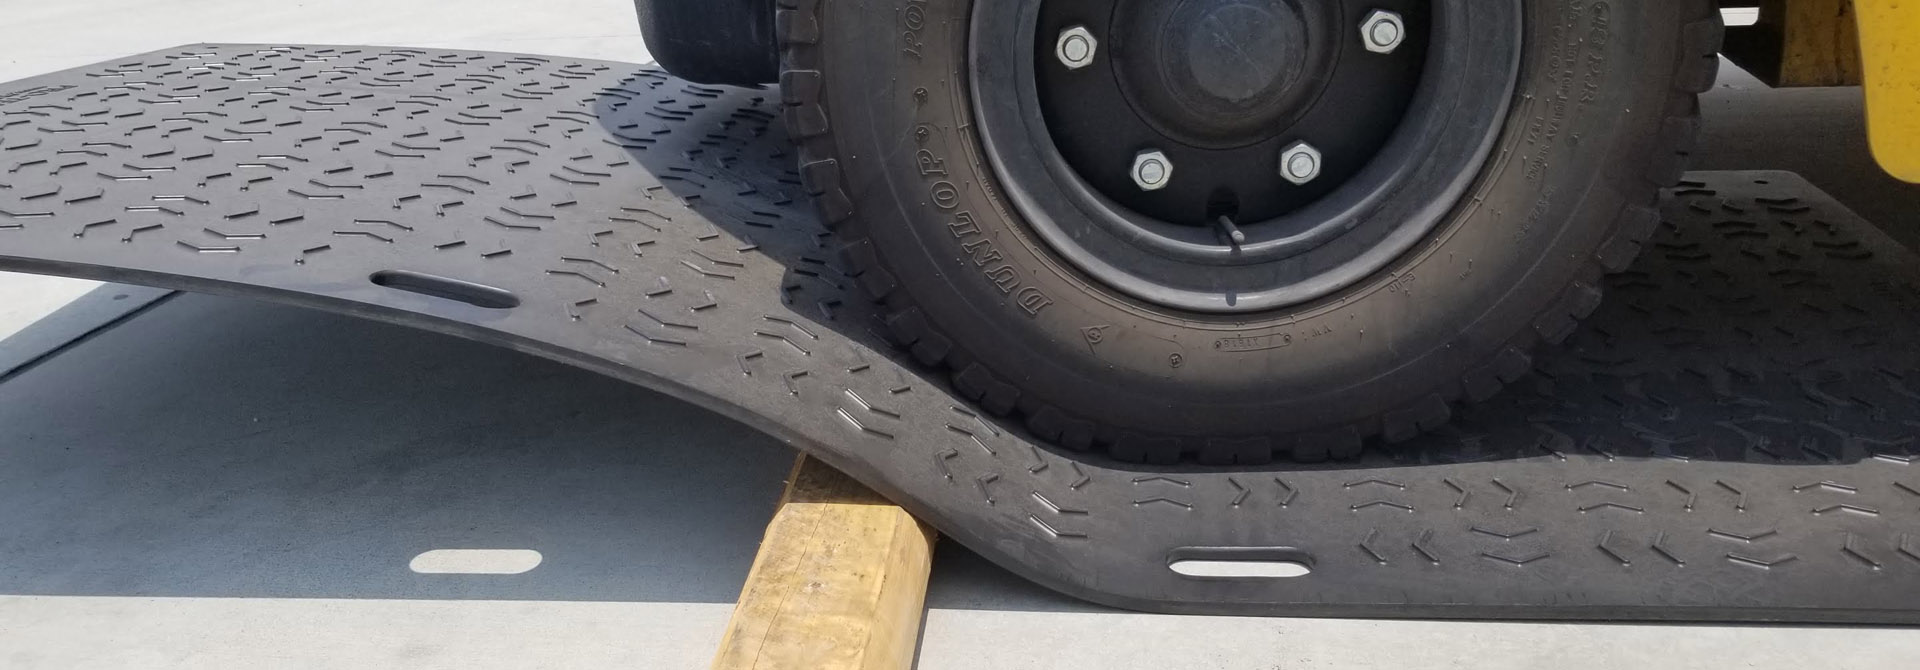 Pro-Tech - Strong Yet Flexible Ground Protection Mats